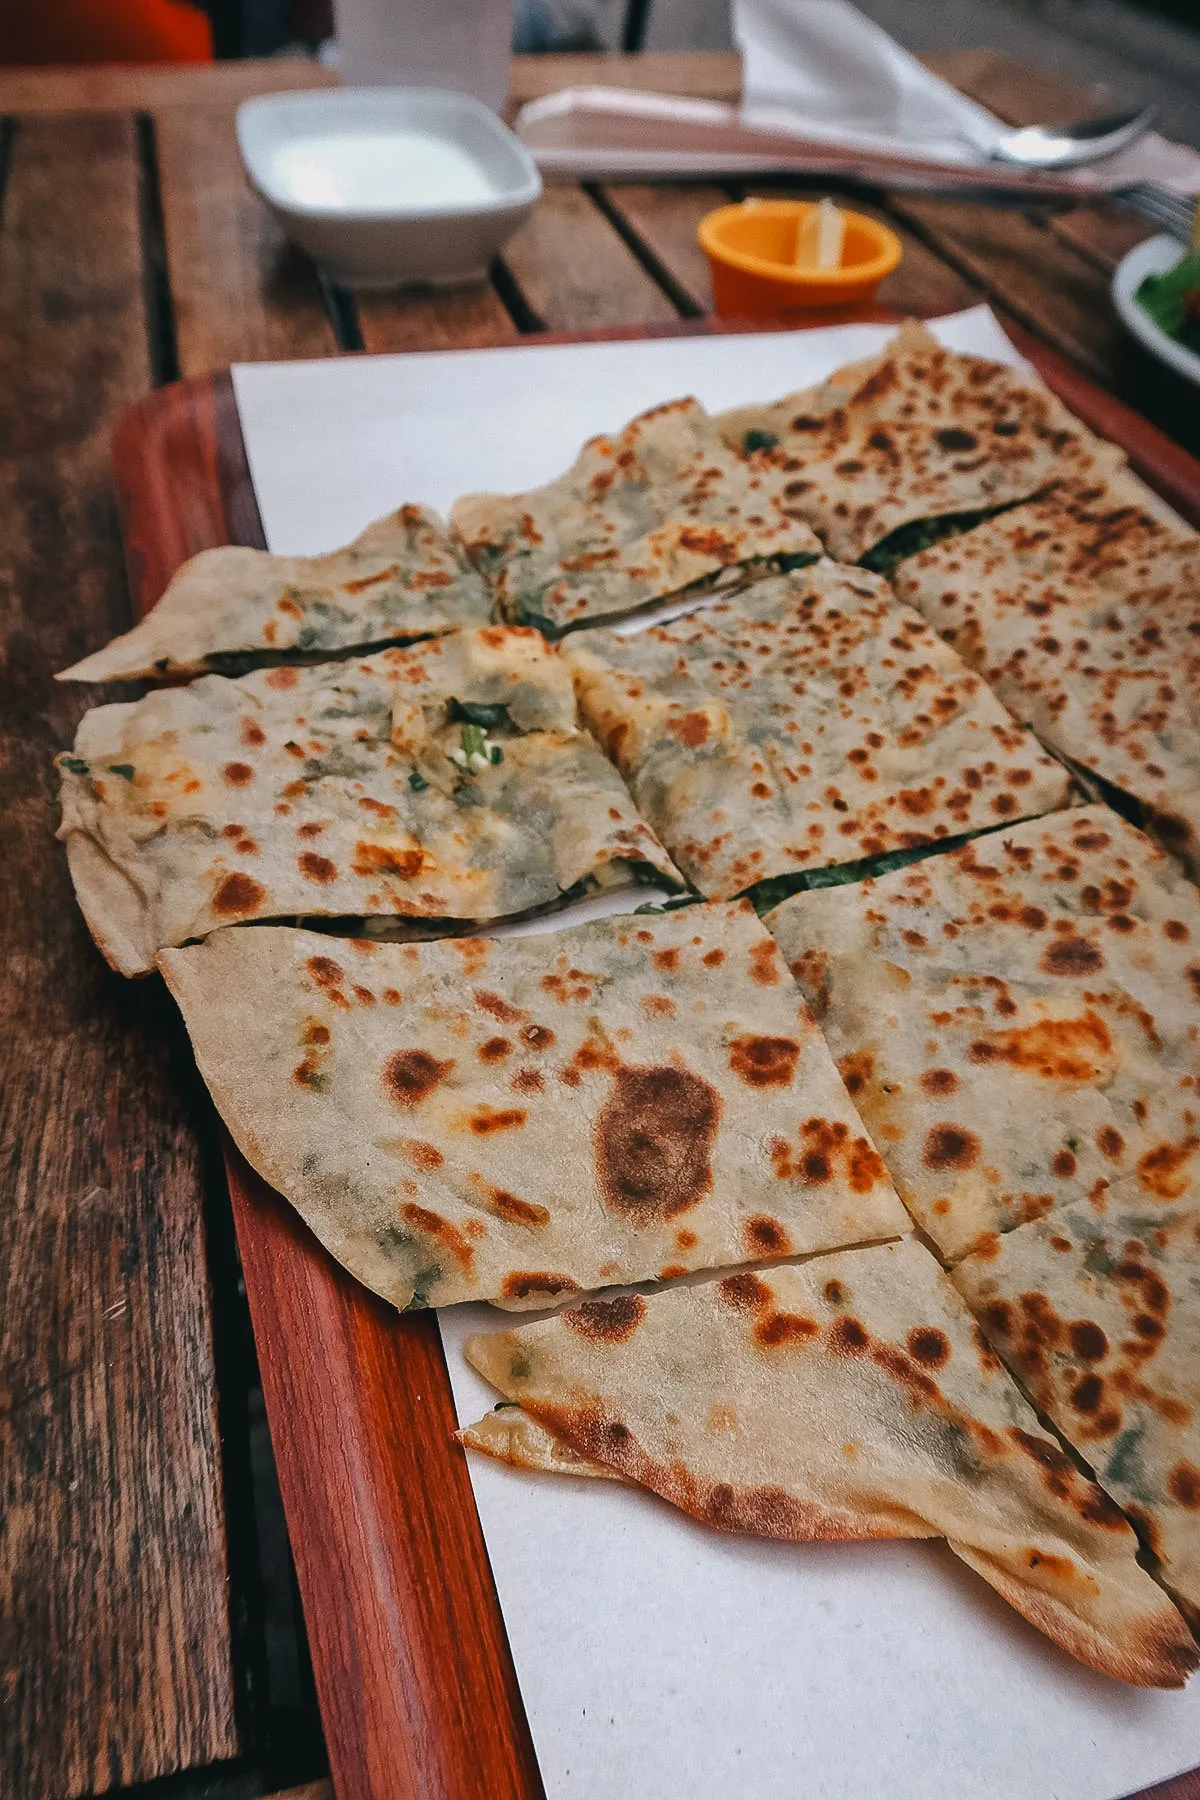 Gozleme at a restaurant in Istanbul